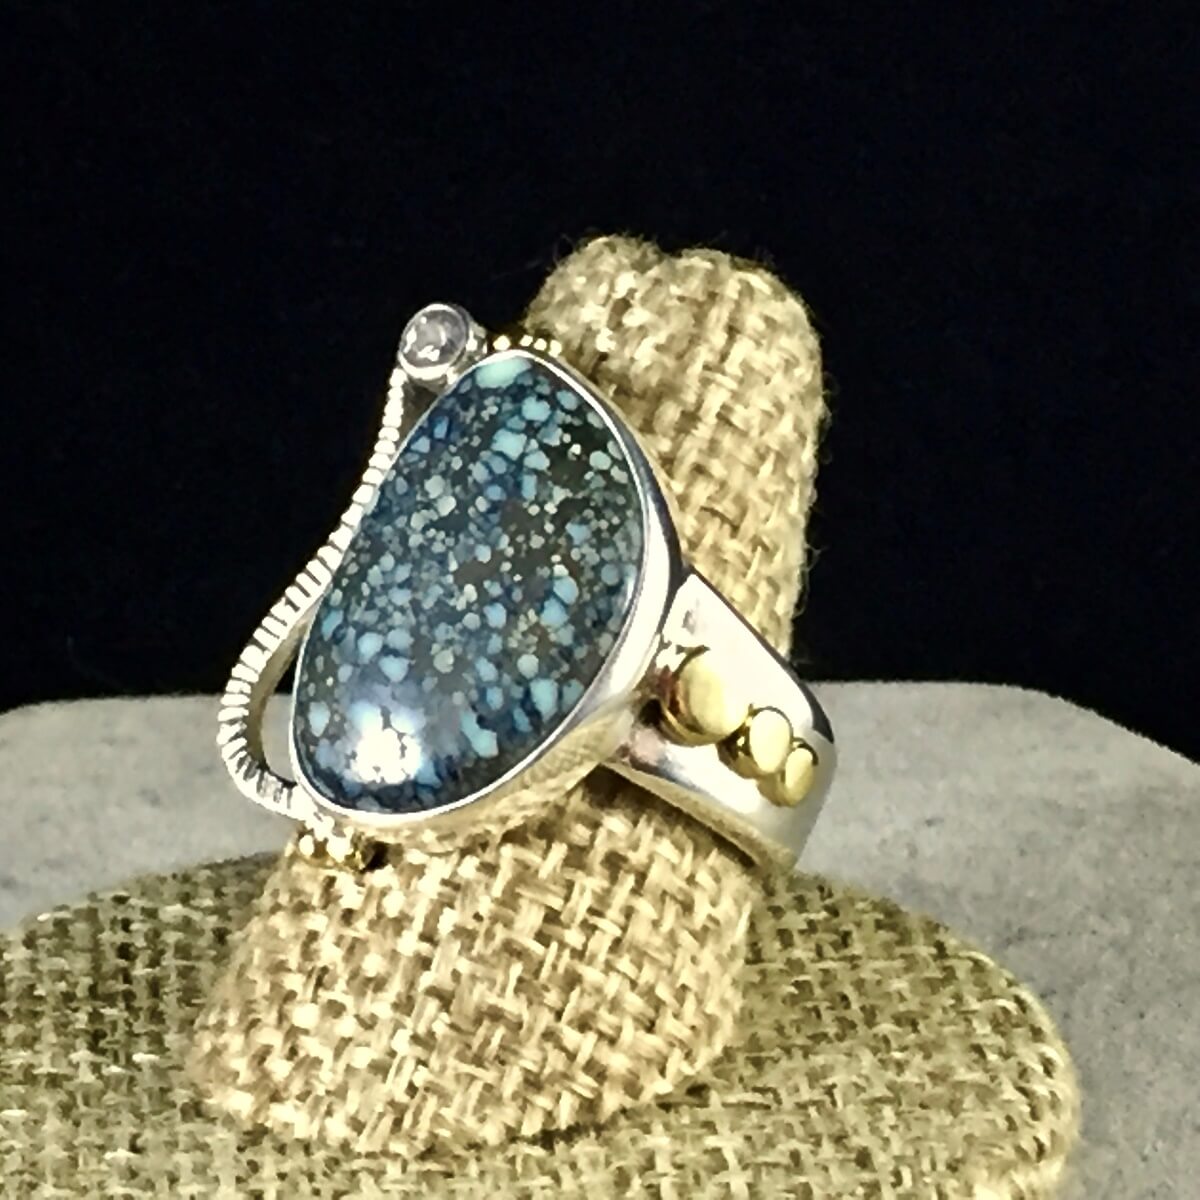 New Lander Chalcosiderite-Variscite and white sapphire contemporary ring,
set in sterling and fine silver, and 18K gold.
https://dancing-raven-stoneworks-llc.square.site/product/drs-19-104-new-lander-sapphire-ring/92?cs=true